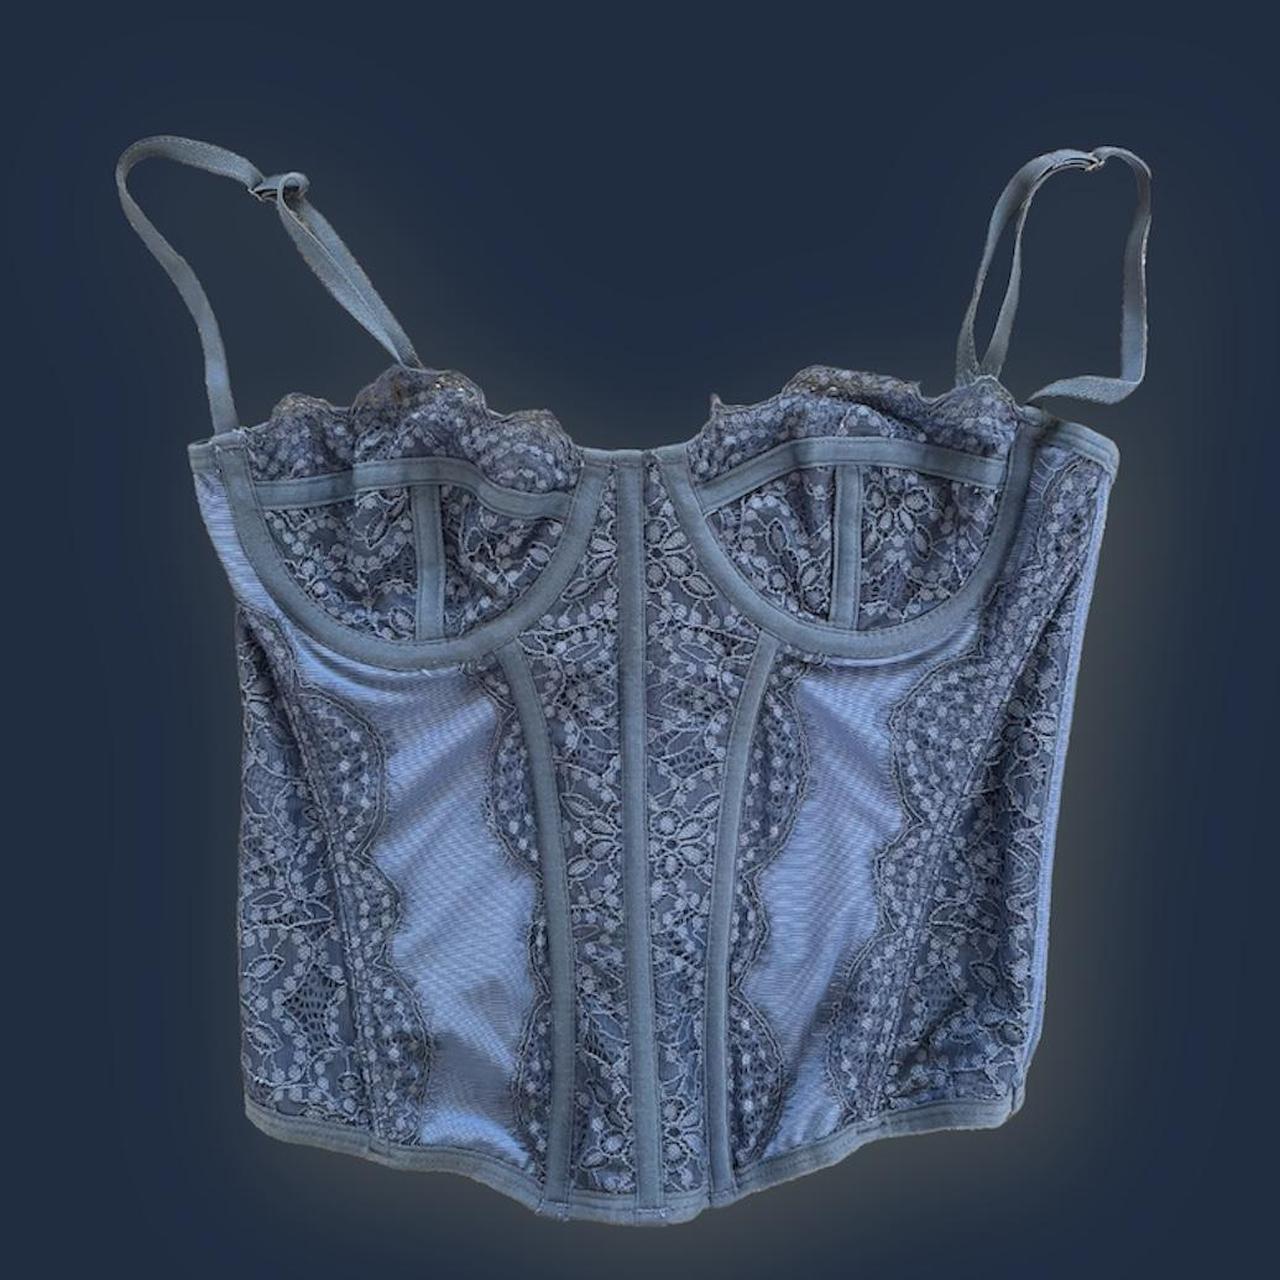 modern love corset from urban outfitters!! this is